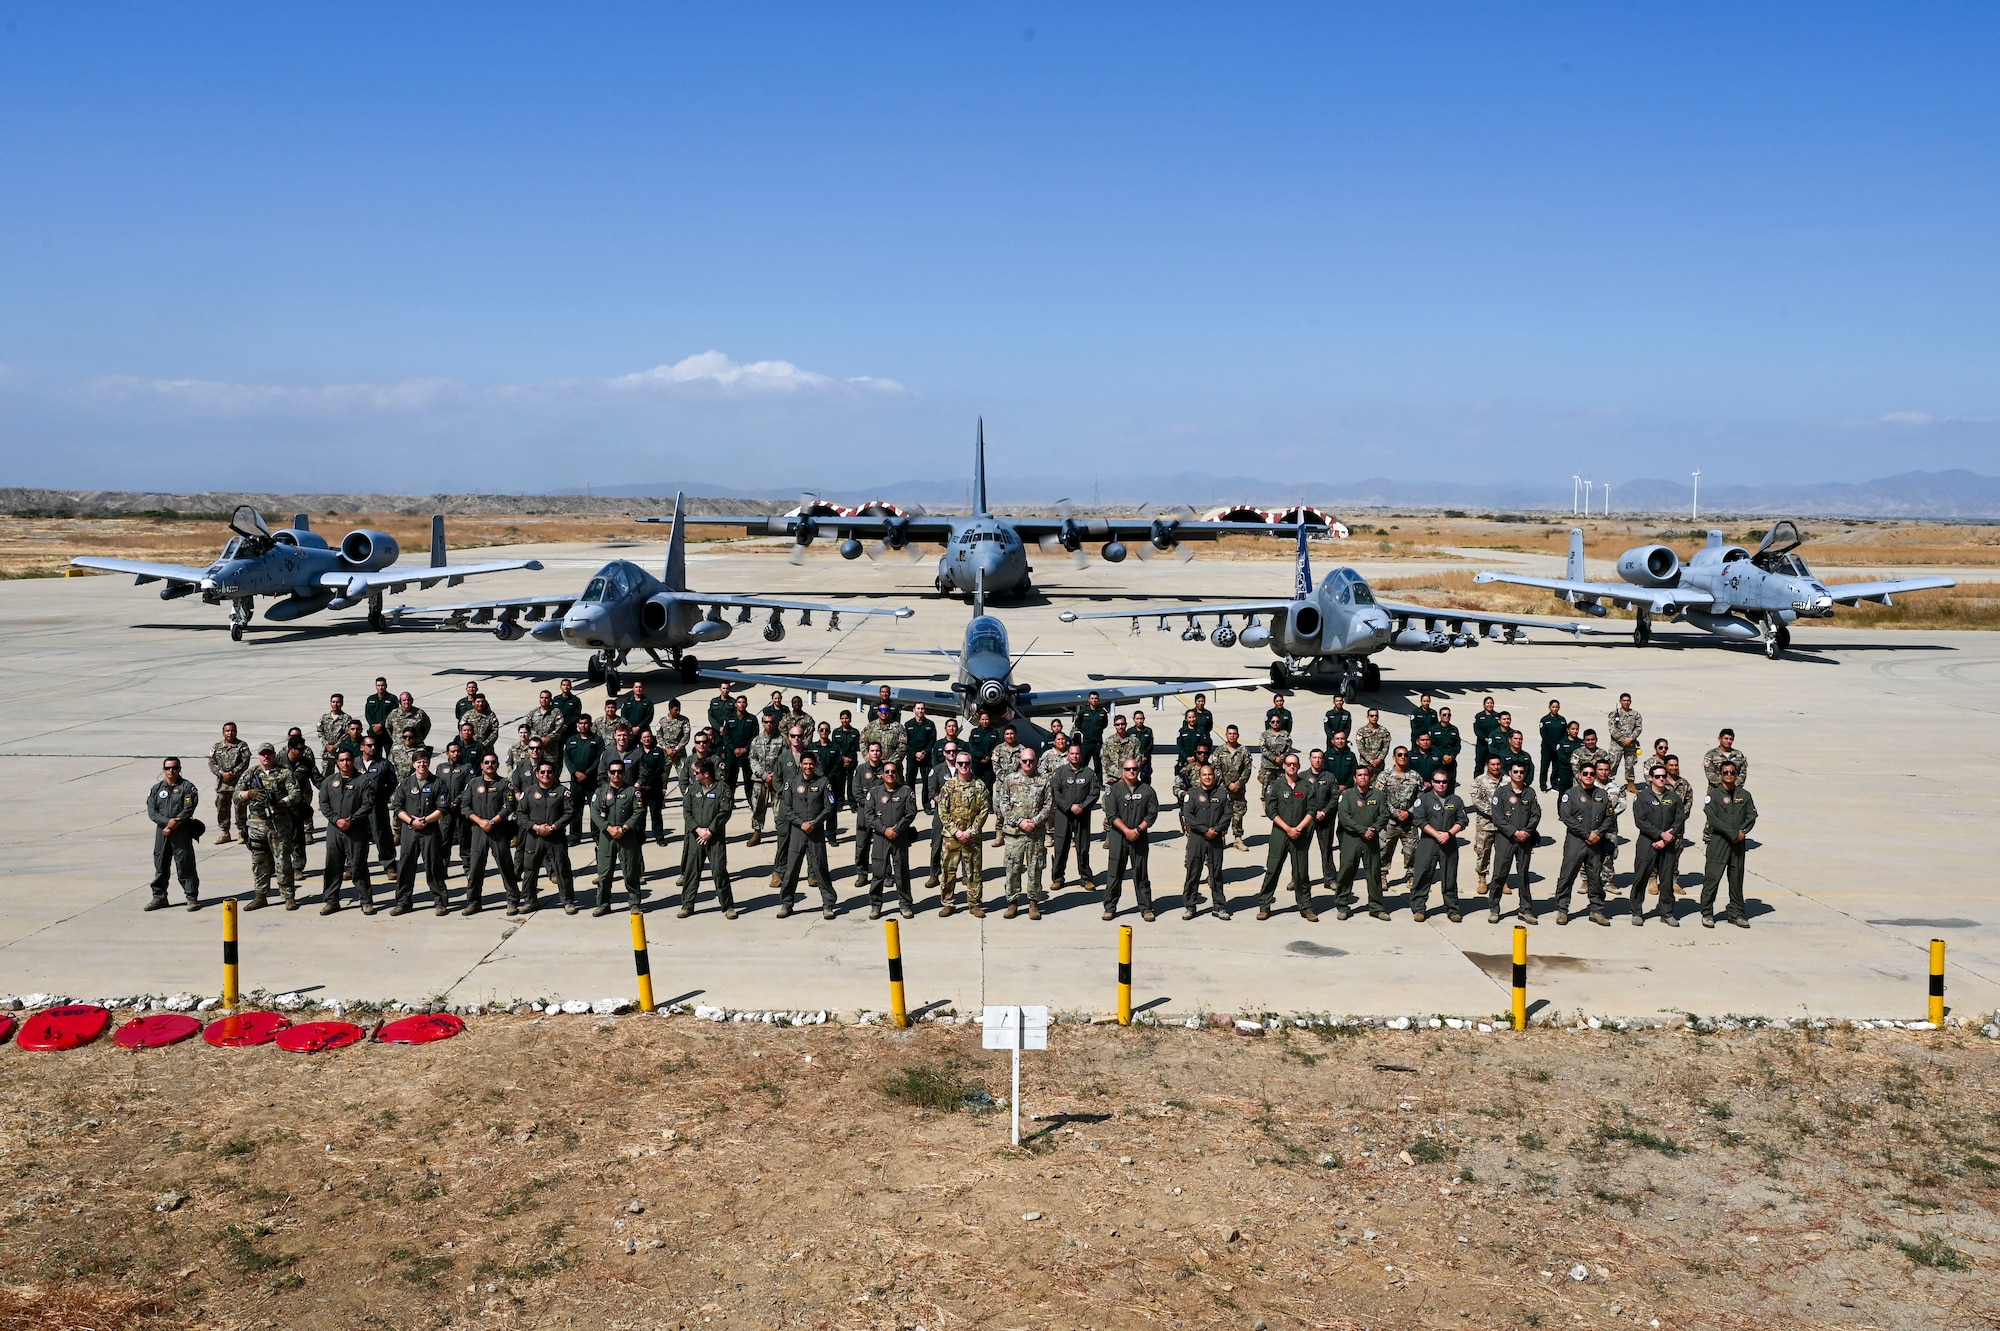 A combined formation of U.S. and Peruvian Airmen stand in front of (front to back) a KT-1 light attack aircraft, two SU-25 attack aircraft, two A-10 attack aircraft, and a C-130 cargo aircraft.